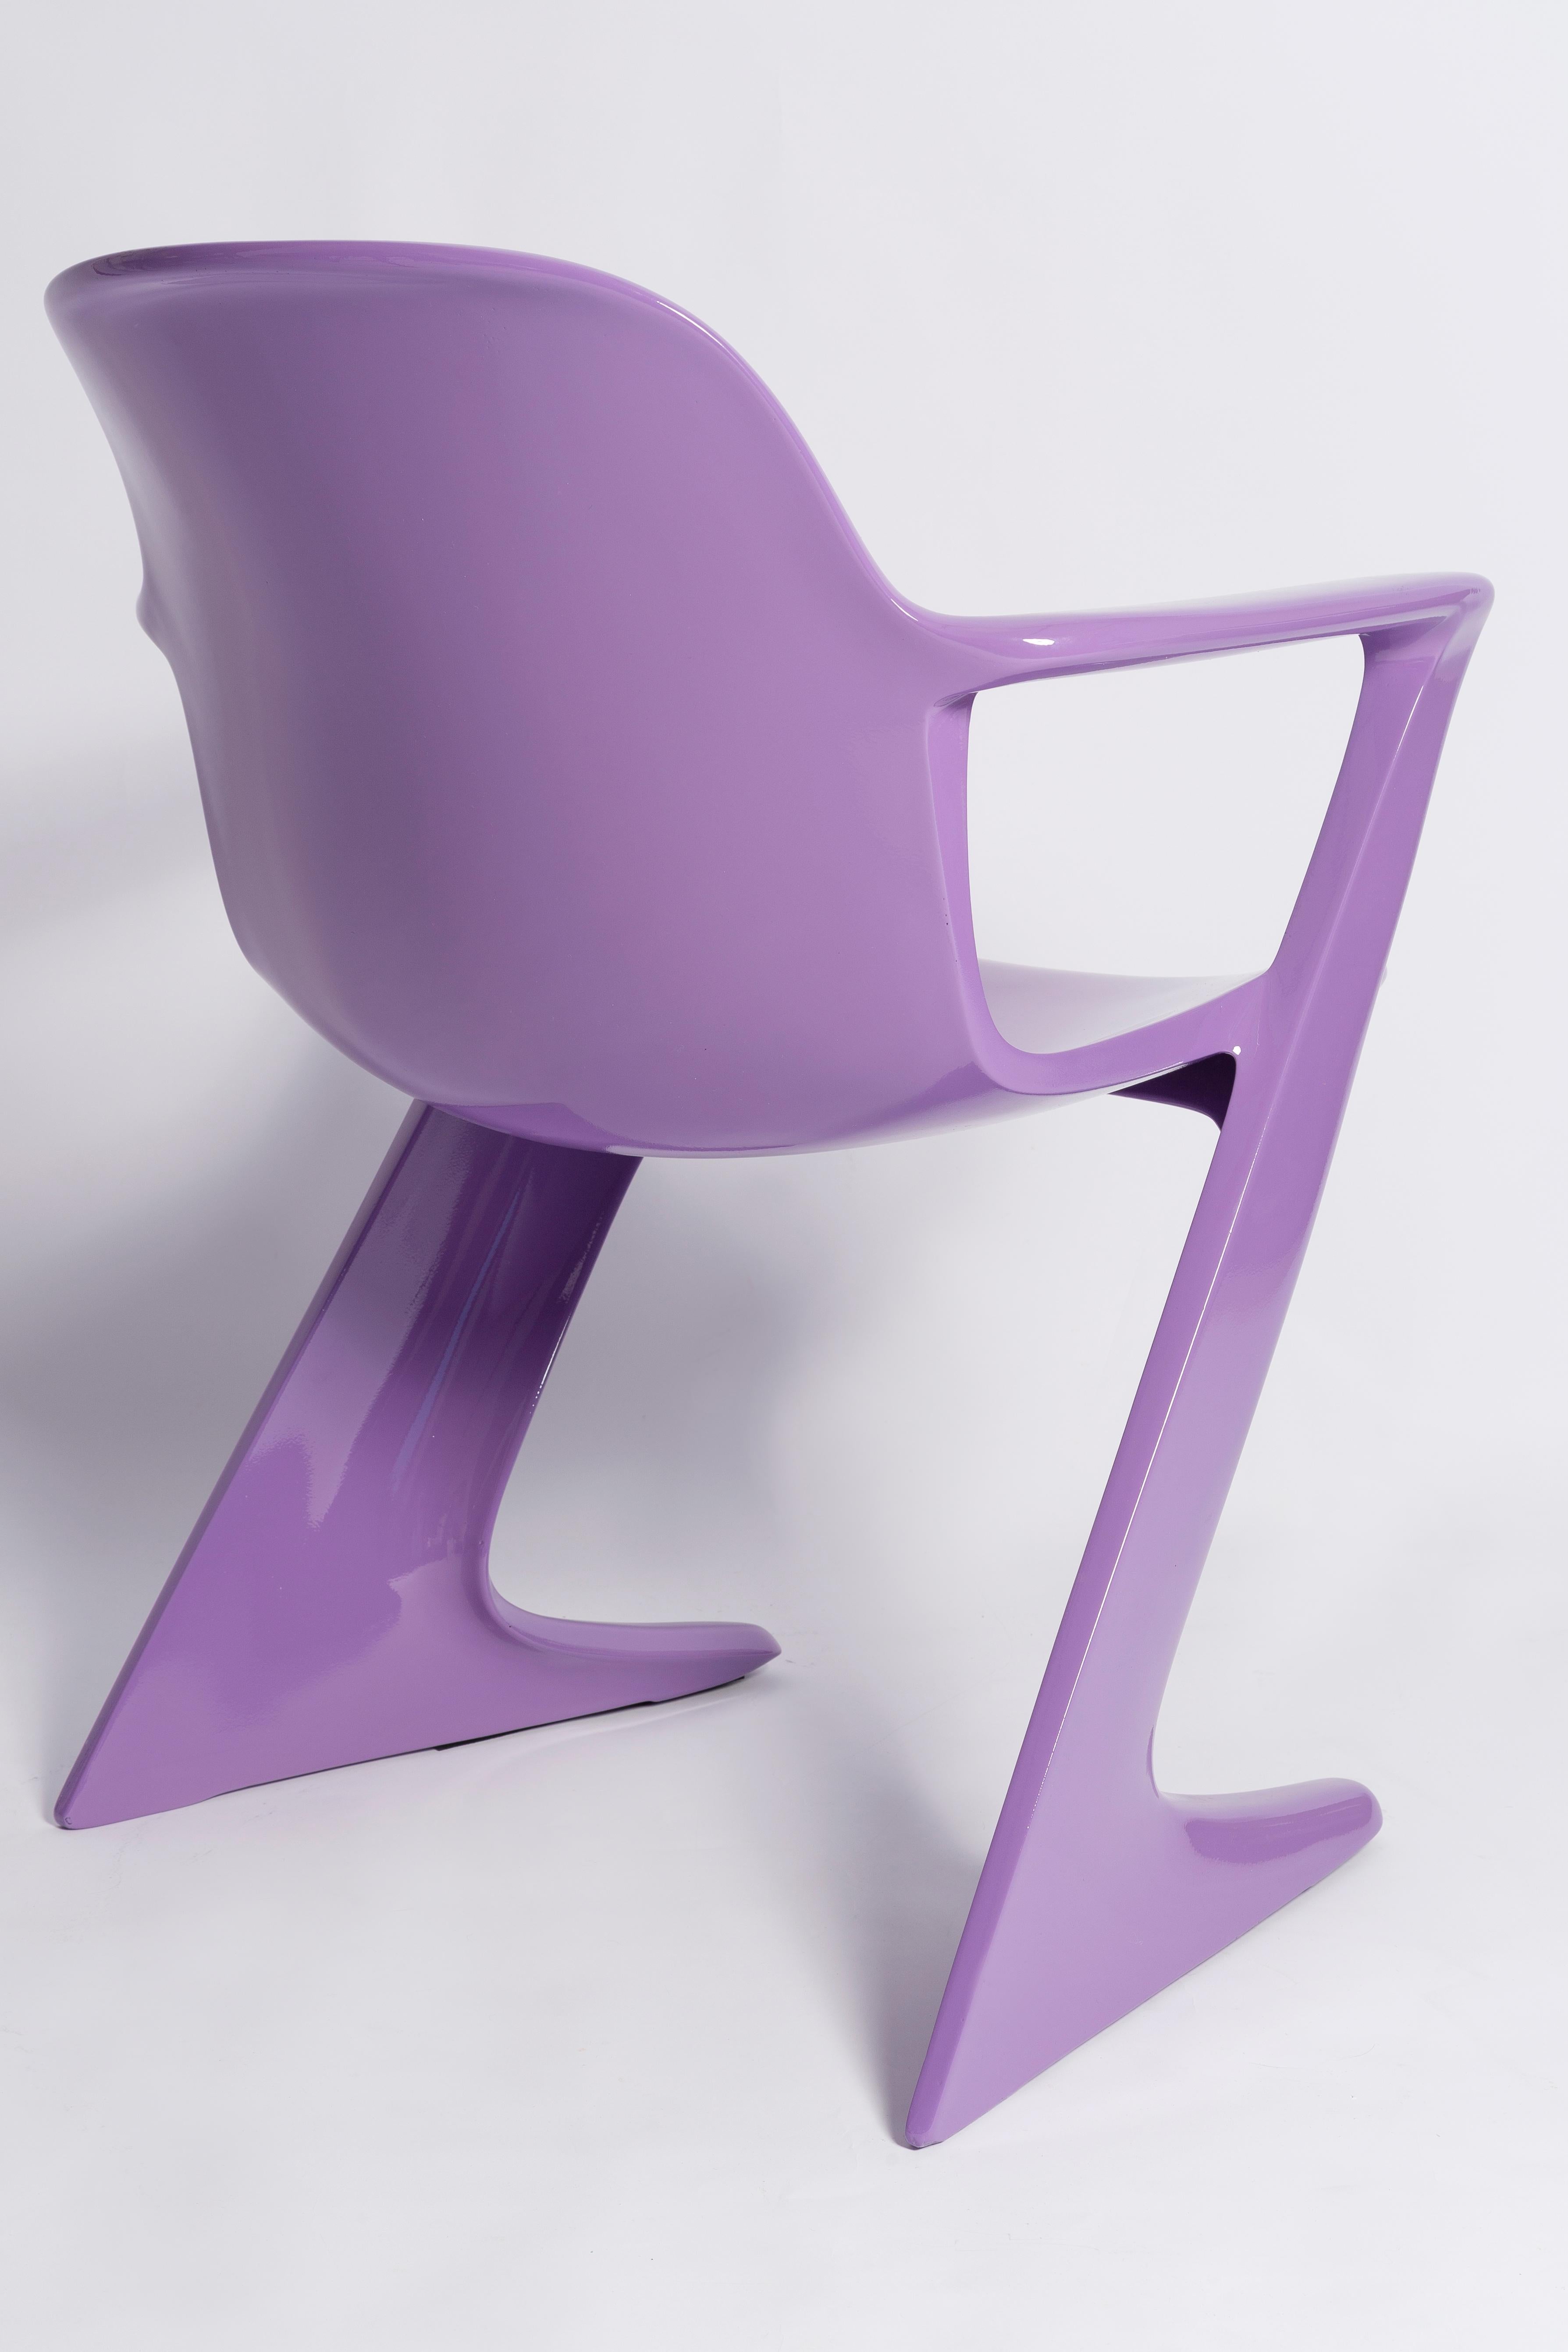 Blue Lilac Kangaroo Chair Designed by Ernst Moeckl, Germany, 1968 For Sale 4